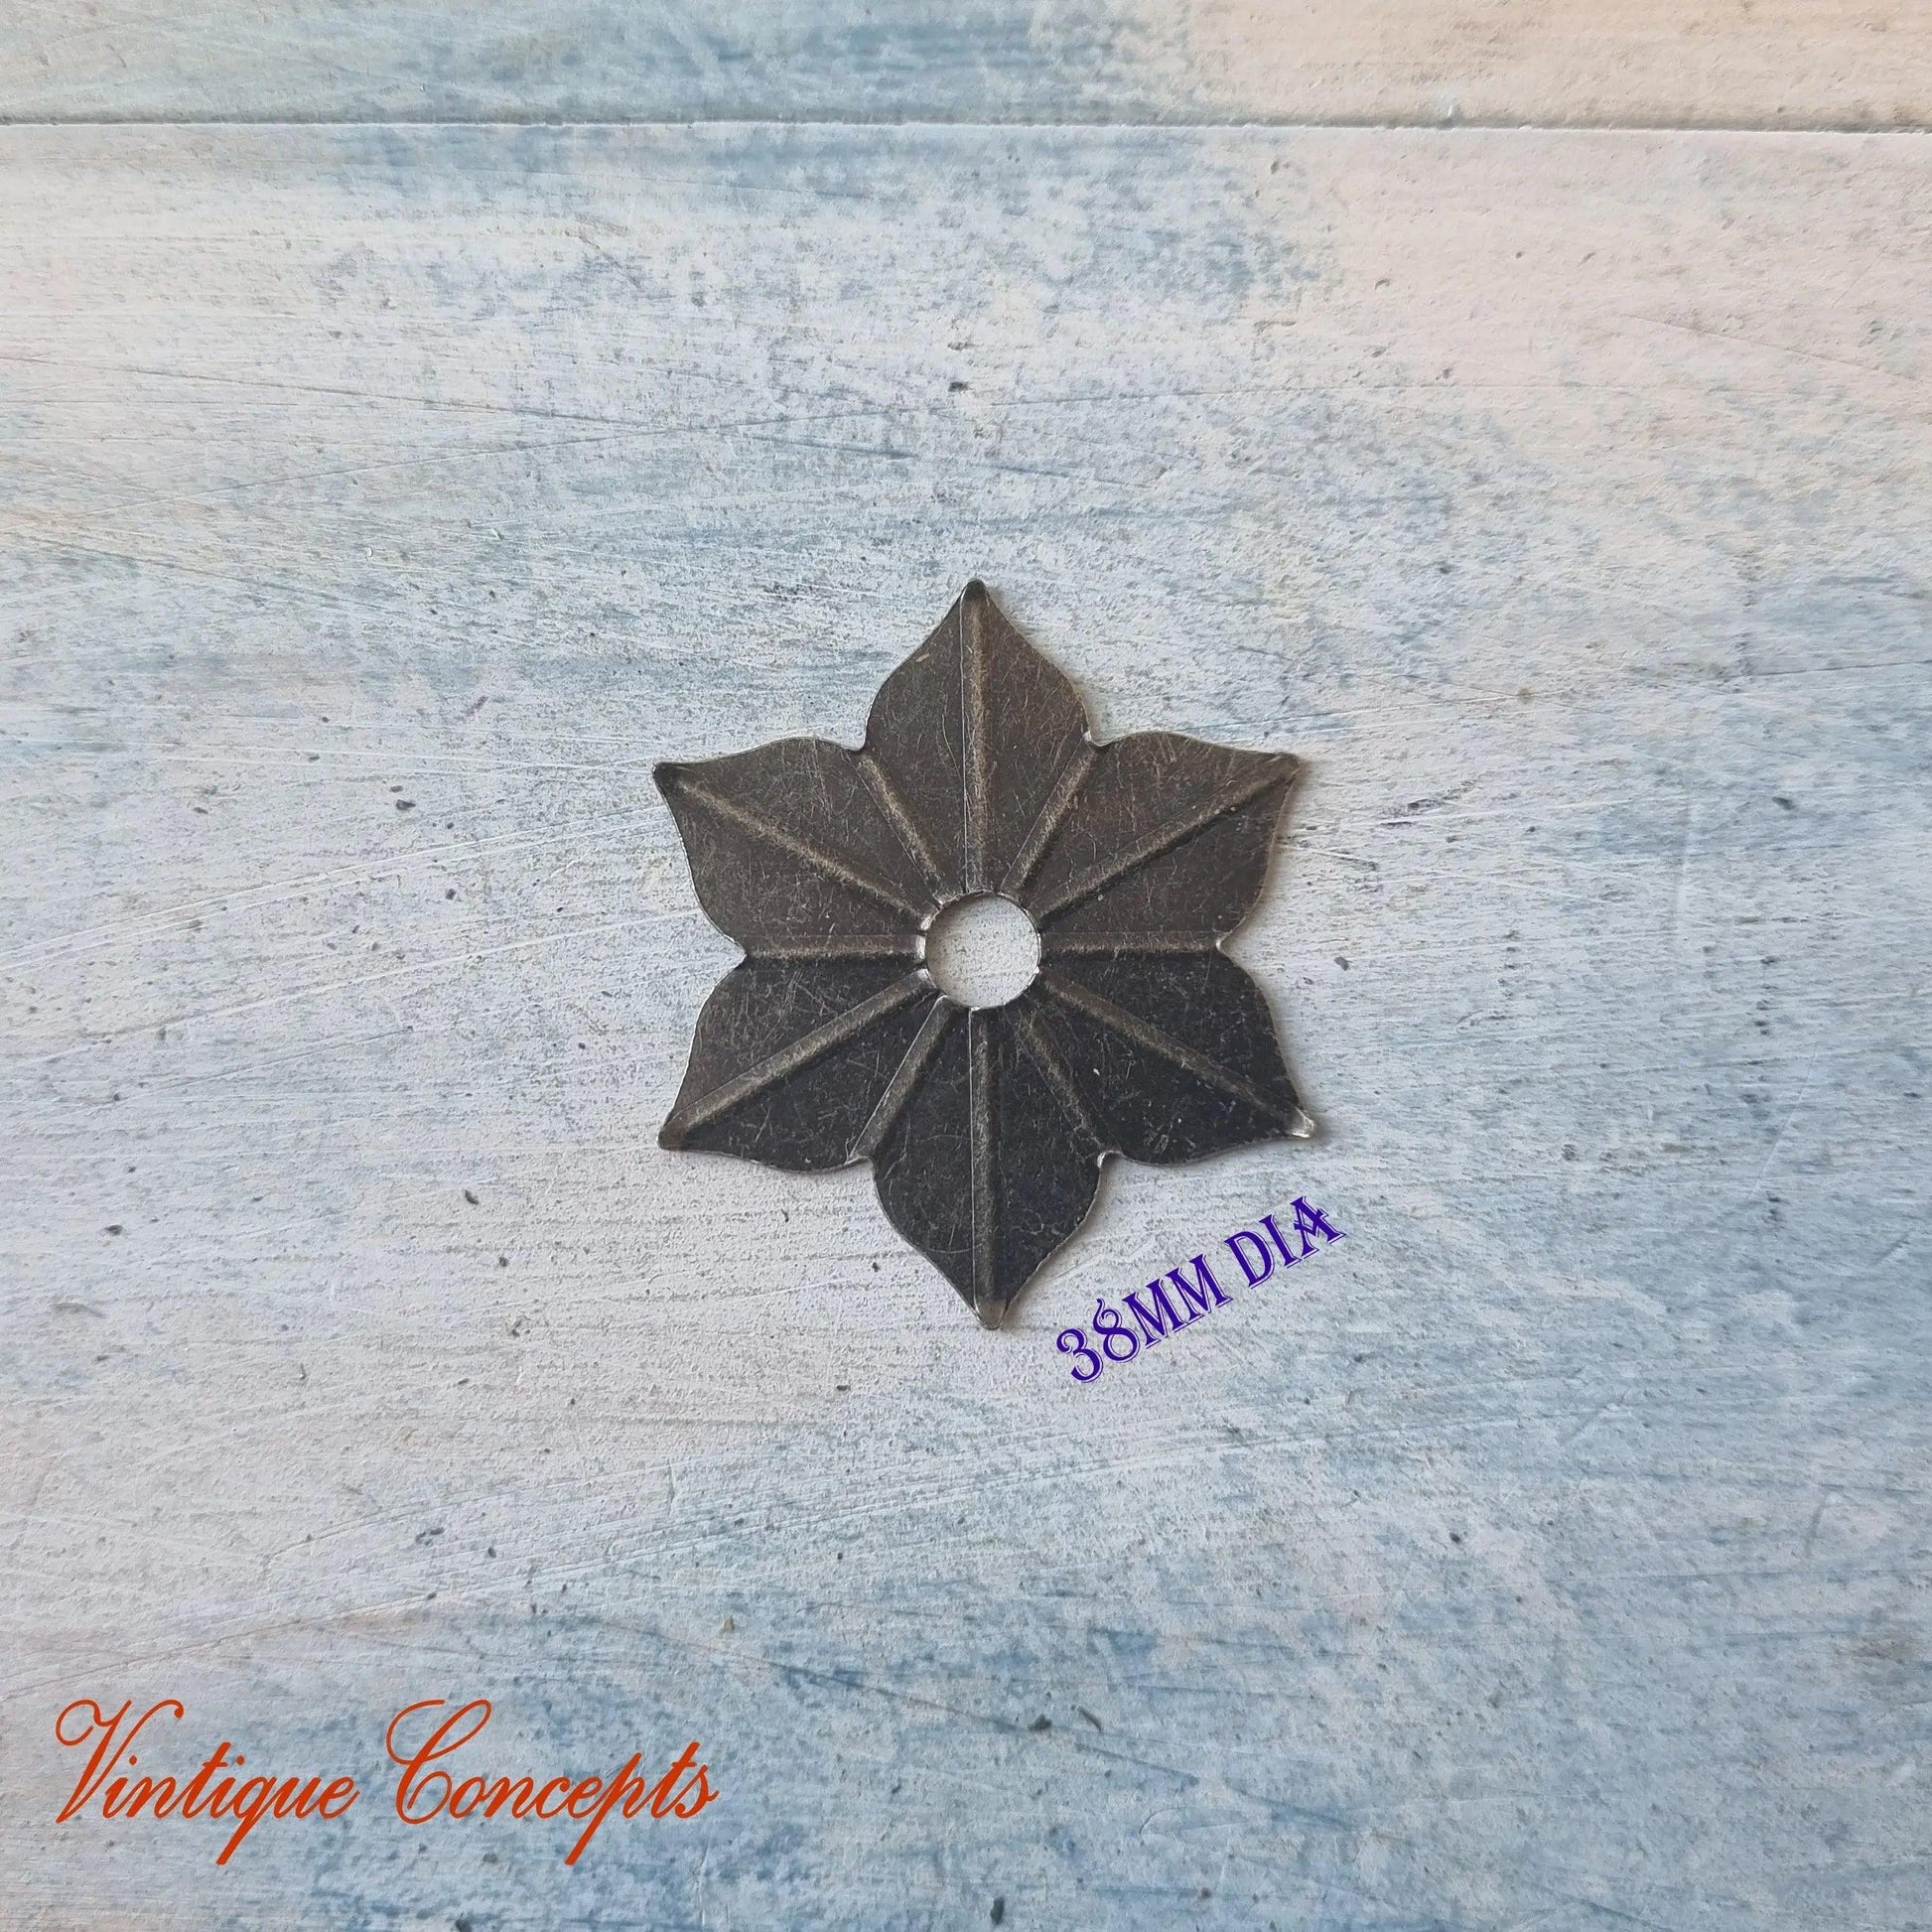 Bronze flower cover plate or washer for drawer knob 35mm dia - Vintique Concepts